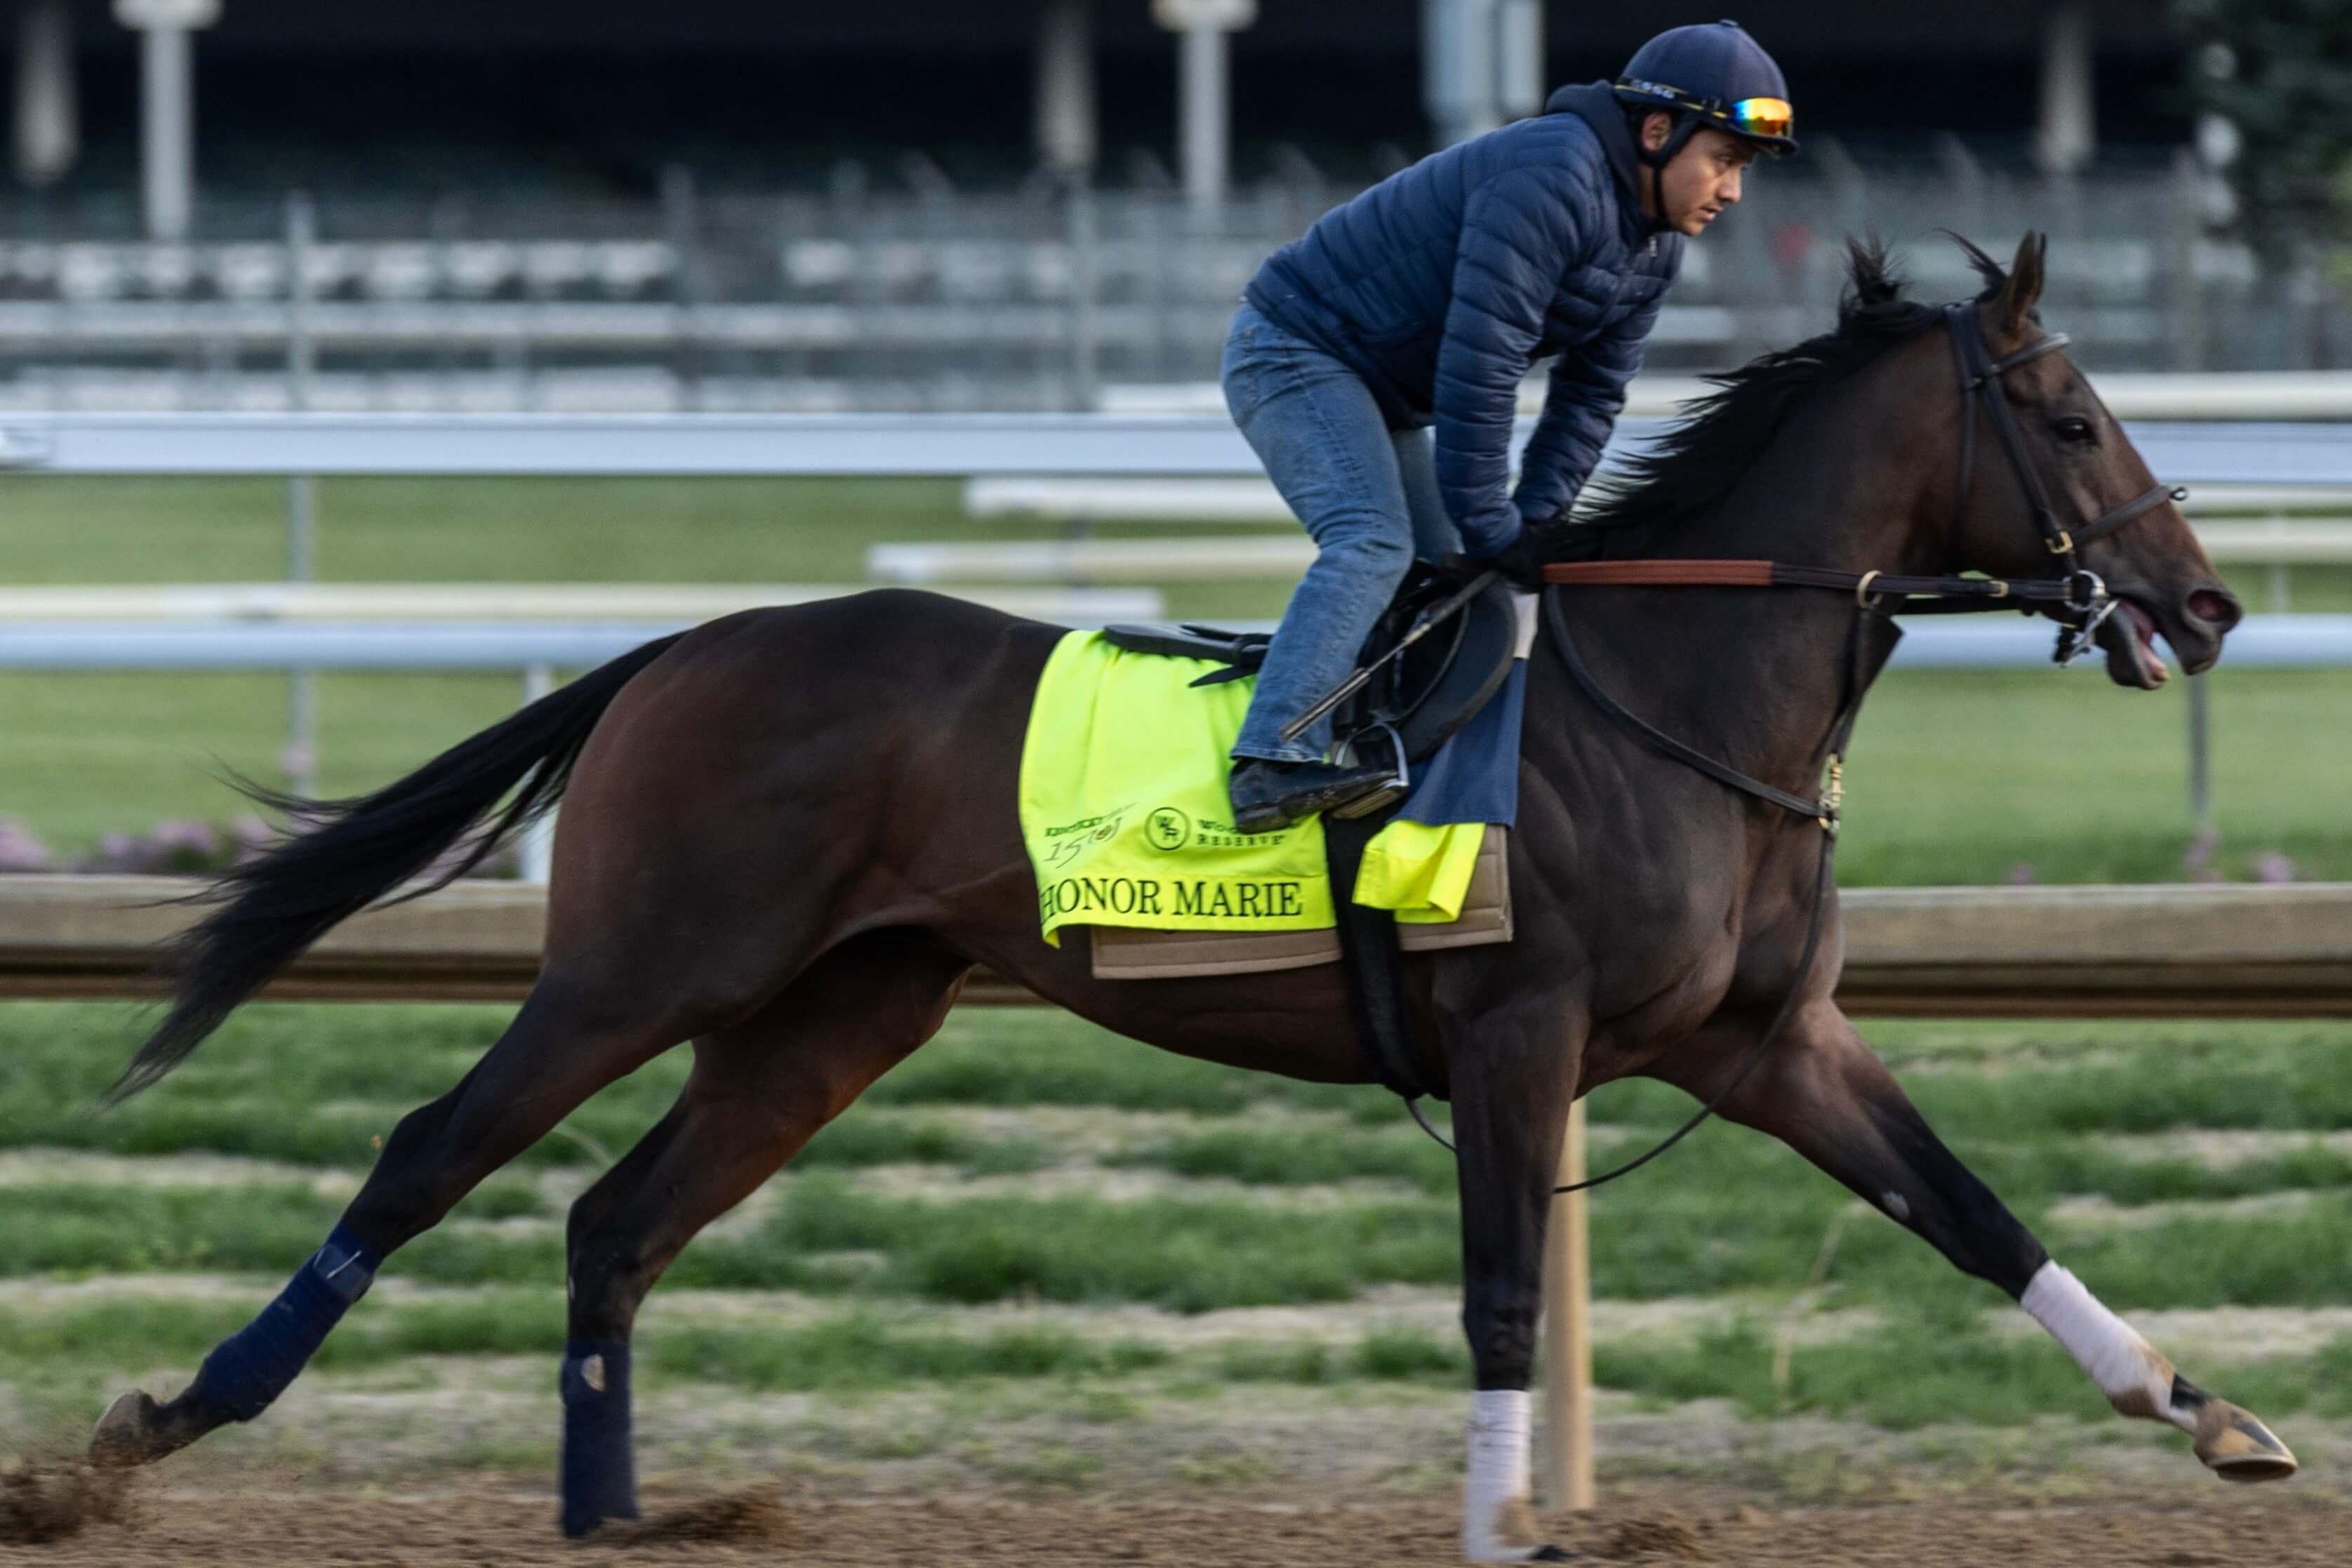 How To Bet - Kentucky Derby Picks: Best Trifecta, Superfecta, and Exacta Bets